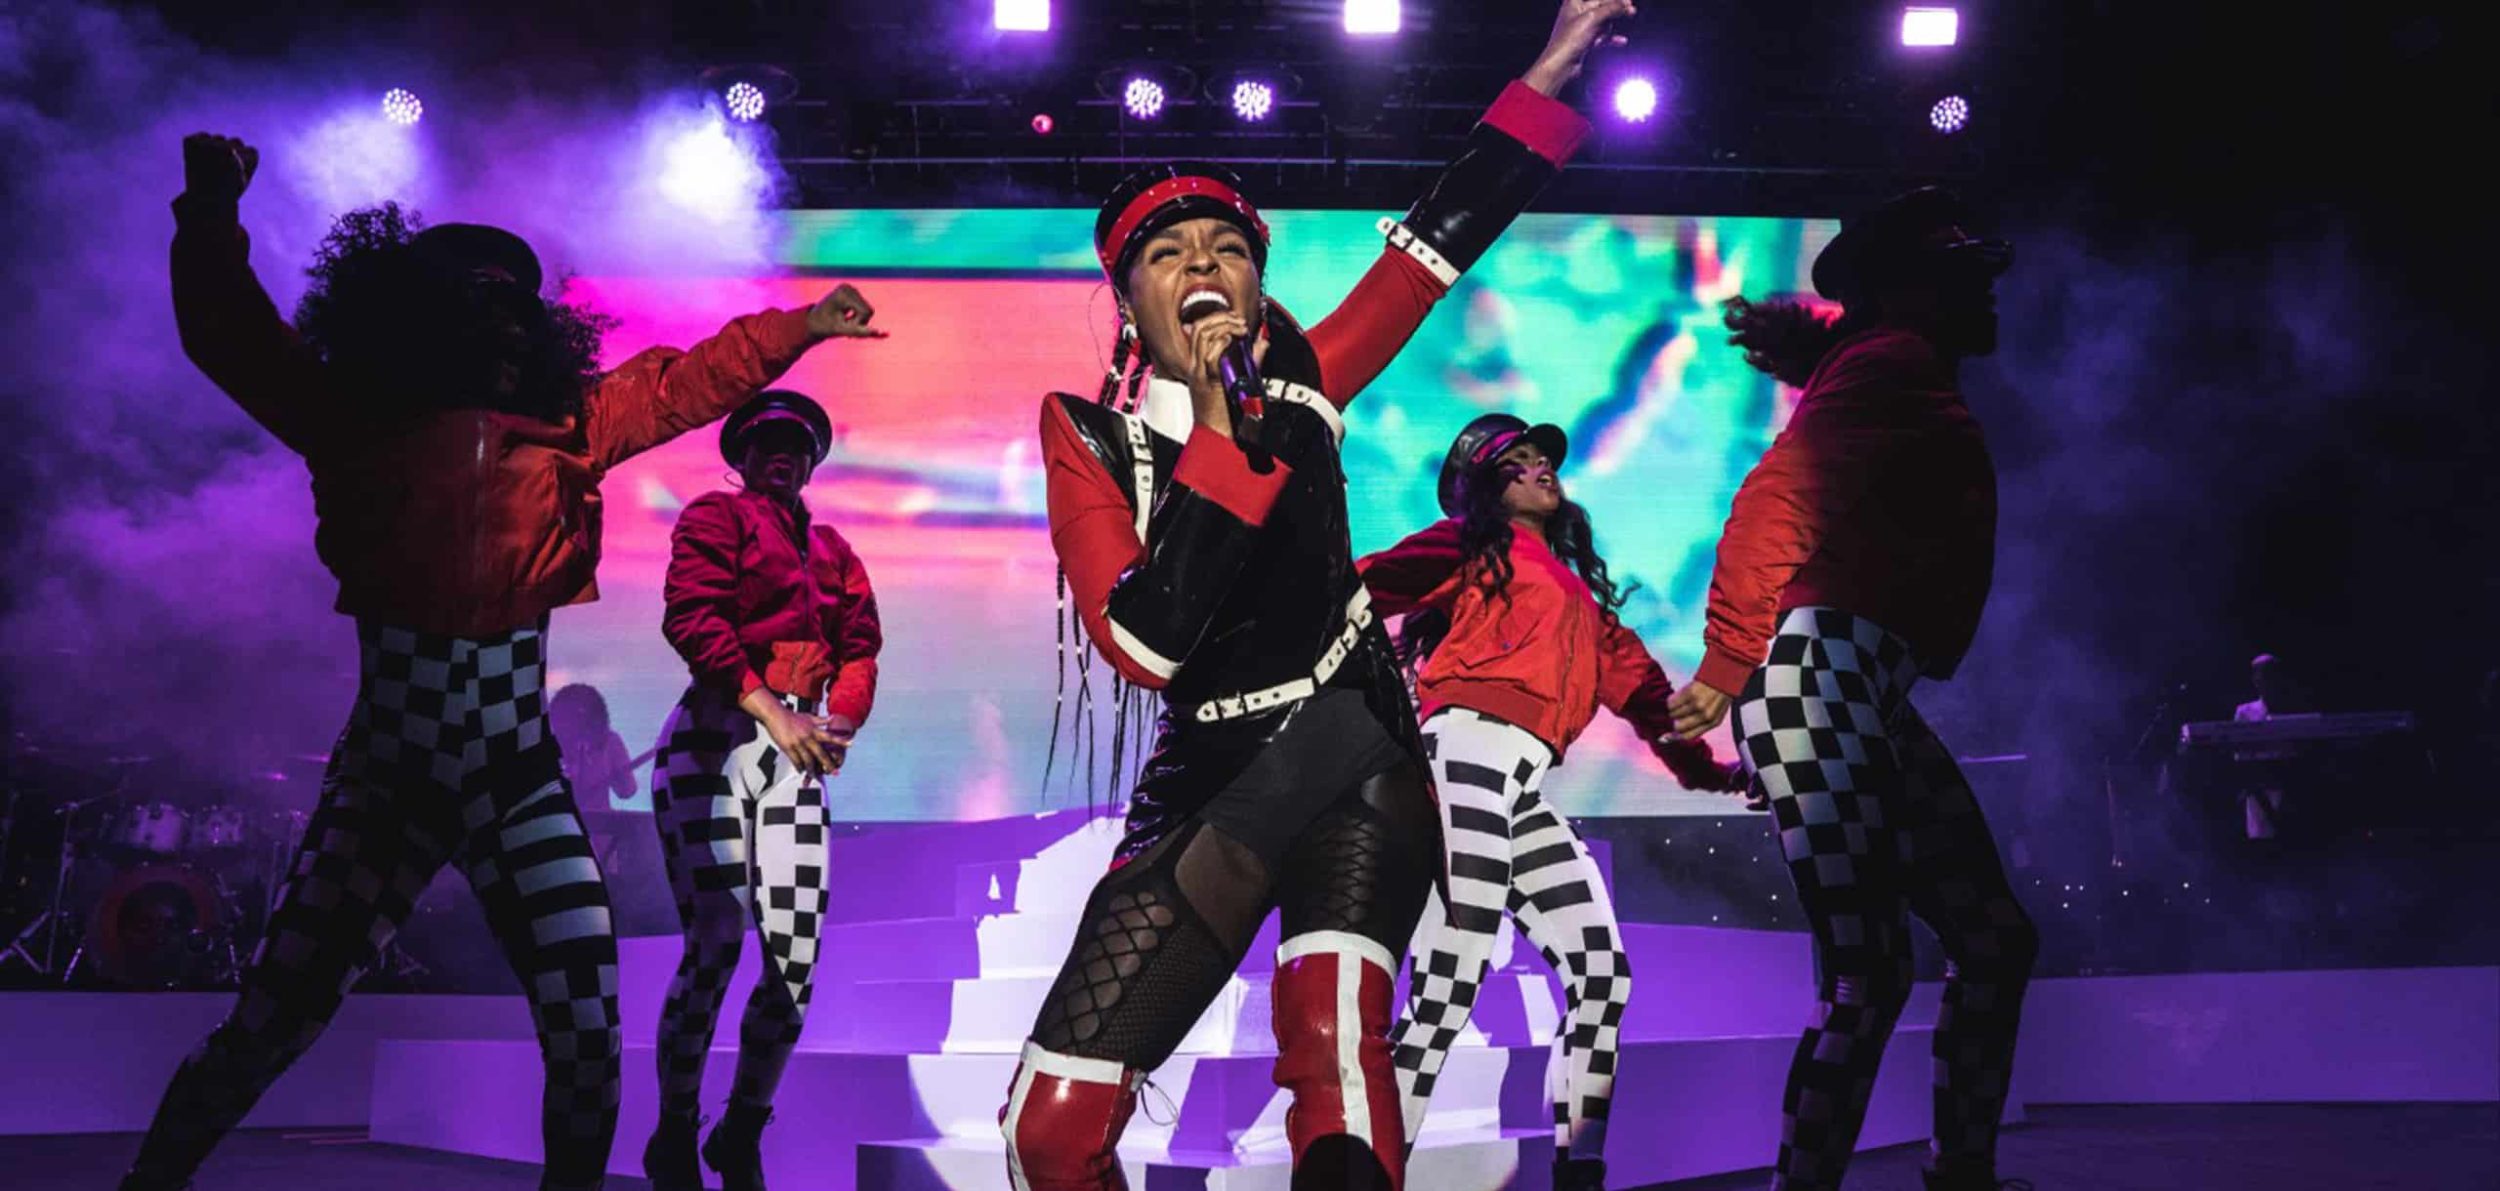 Janelle Monáe performing at Pier 17